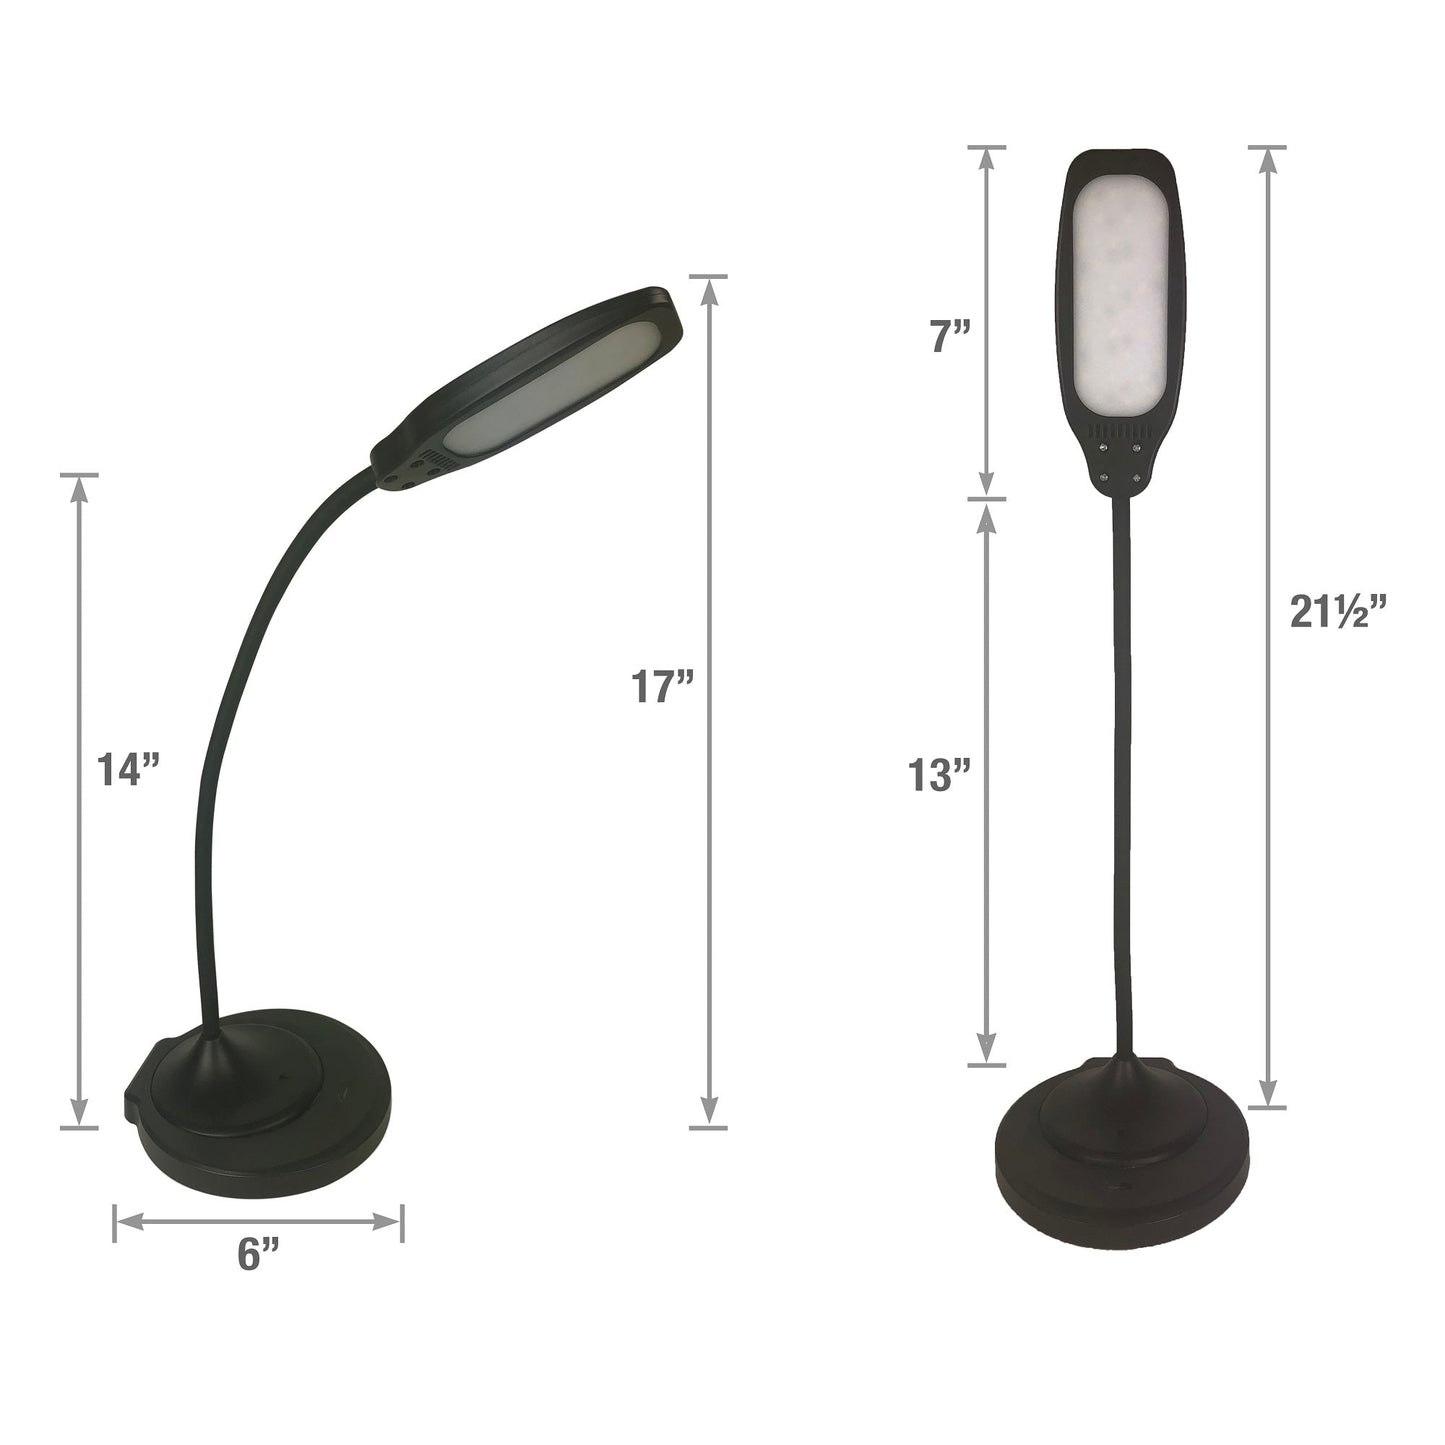 DAC® MP-352 Adjustable LED Desk Lamp/Table Lamp with USB Charging Port, Black